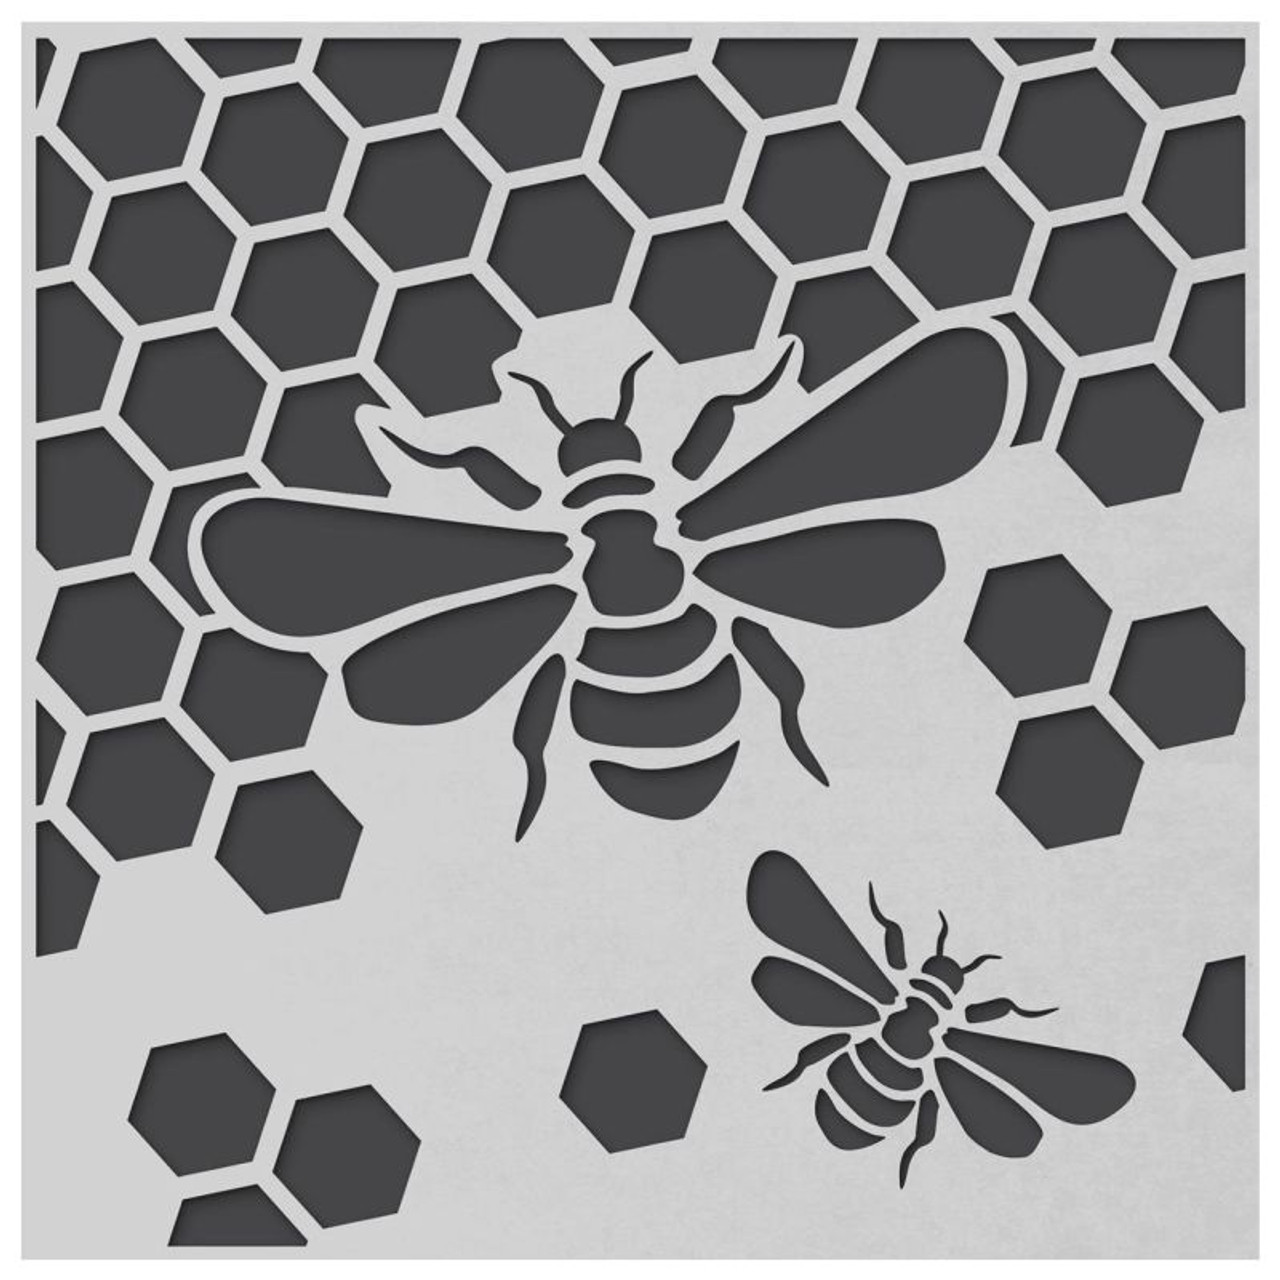 Honeycomb Stencil  Bee's Baked Art Supplies and Artfully Designed Creations